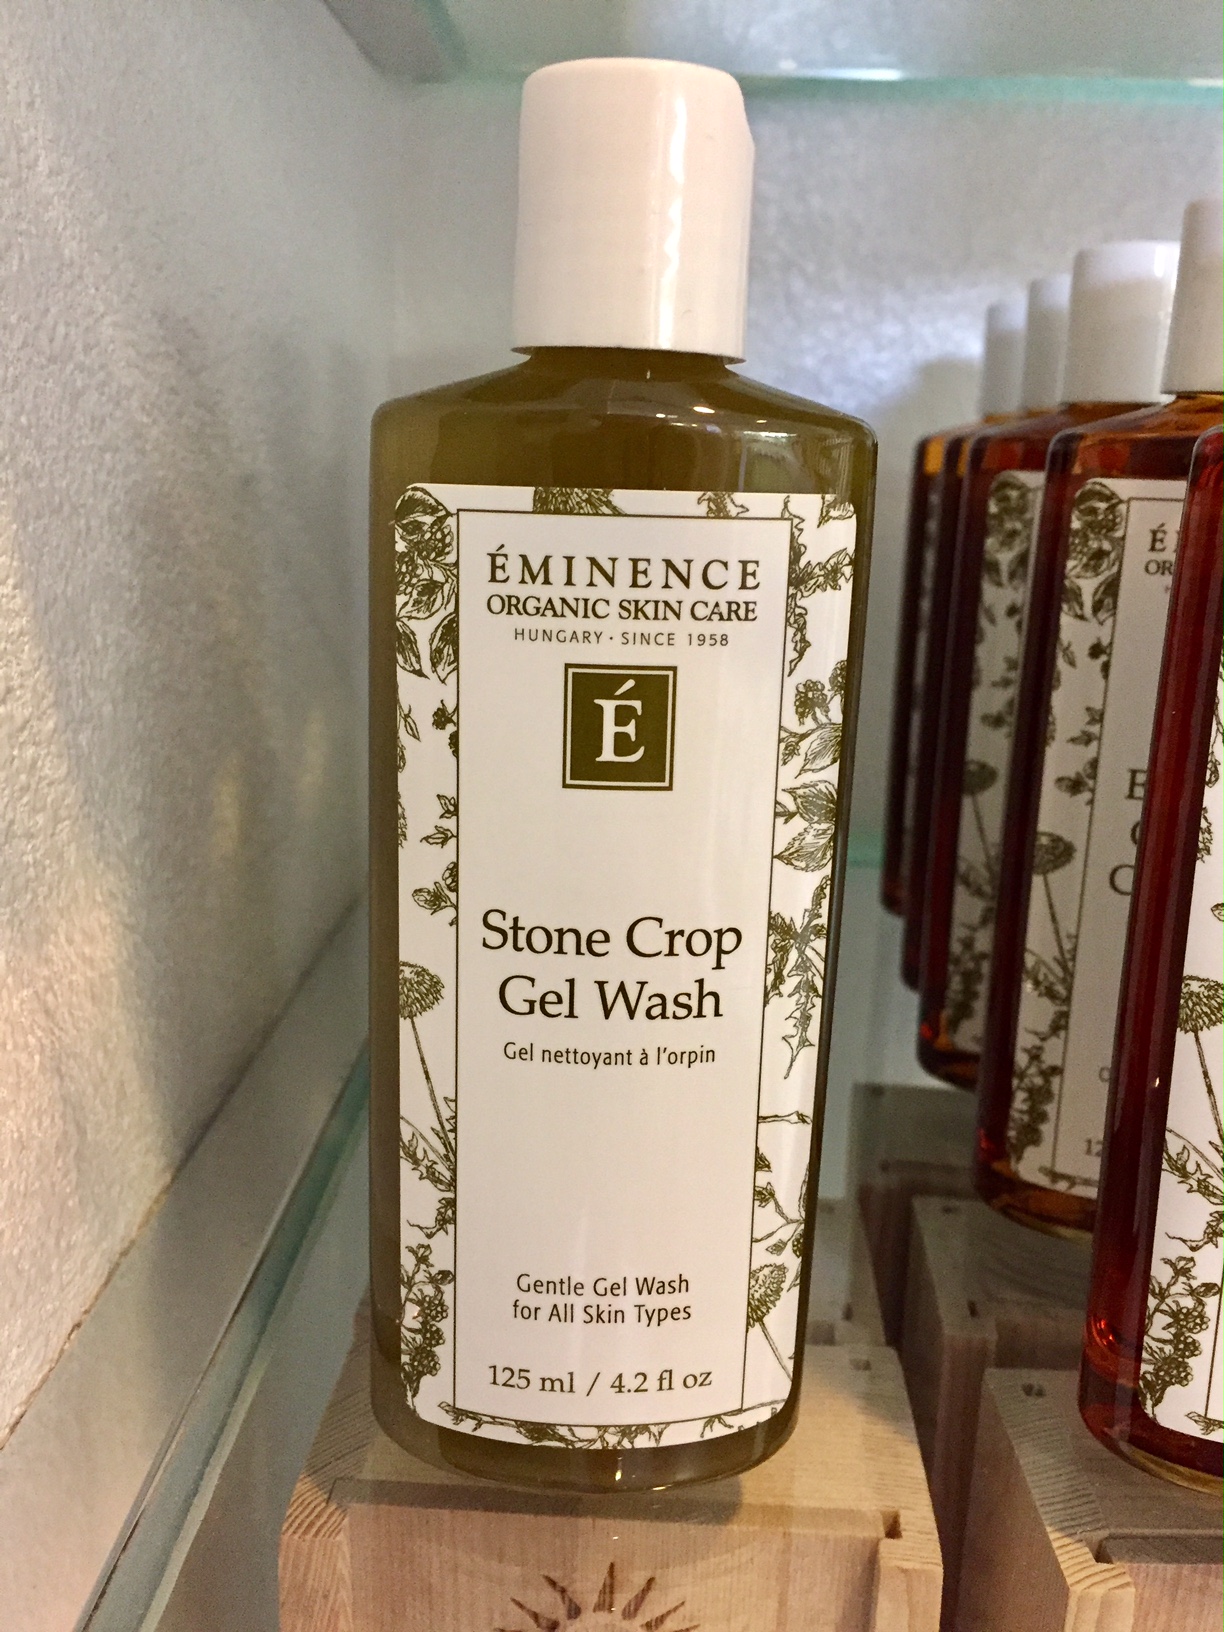 Skincare Products from Eminence Organic Skin Care